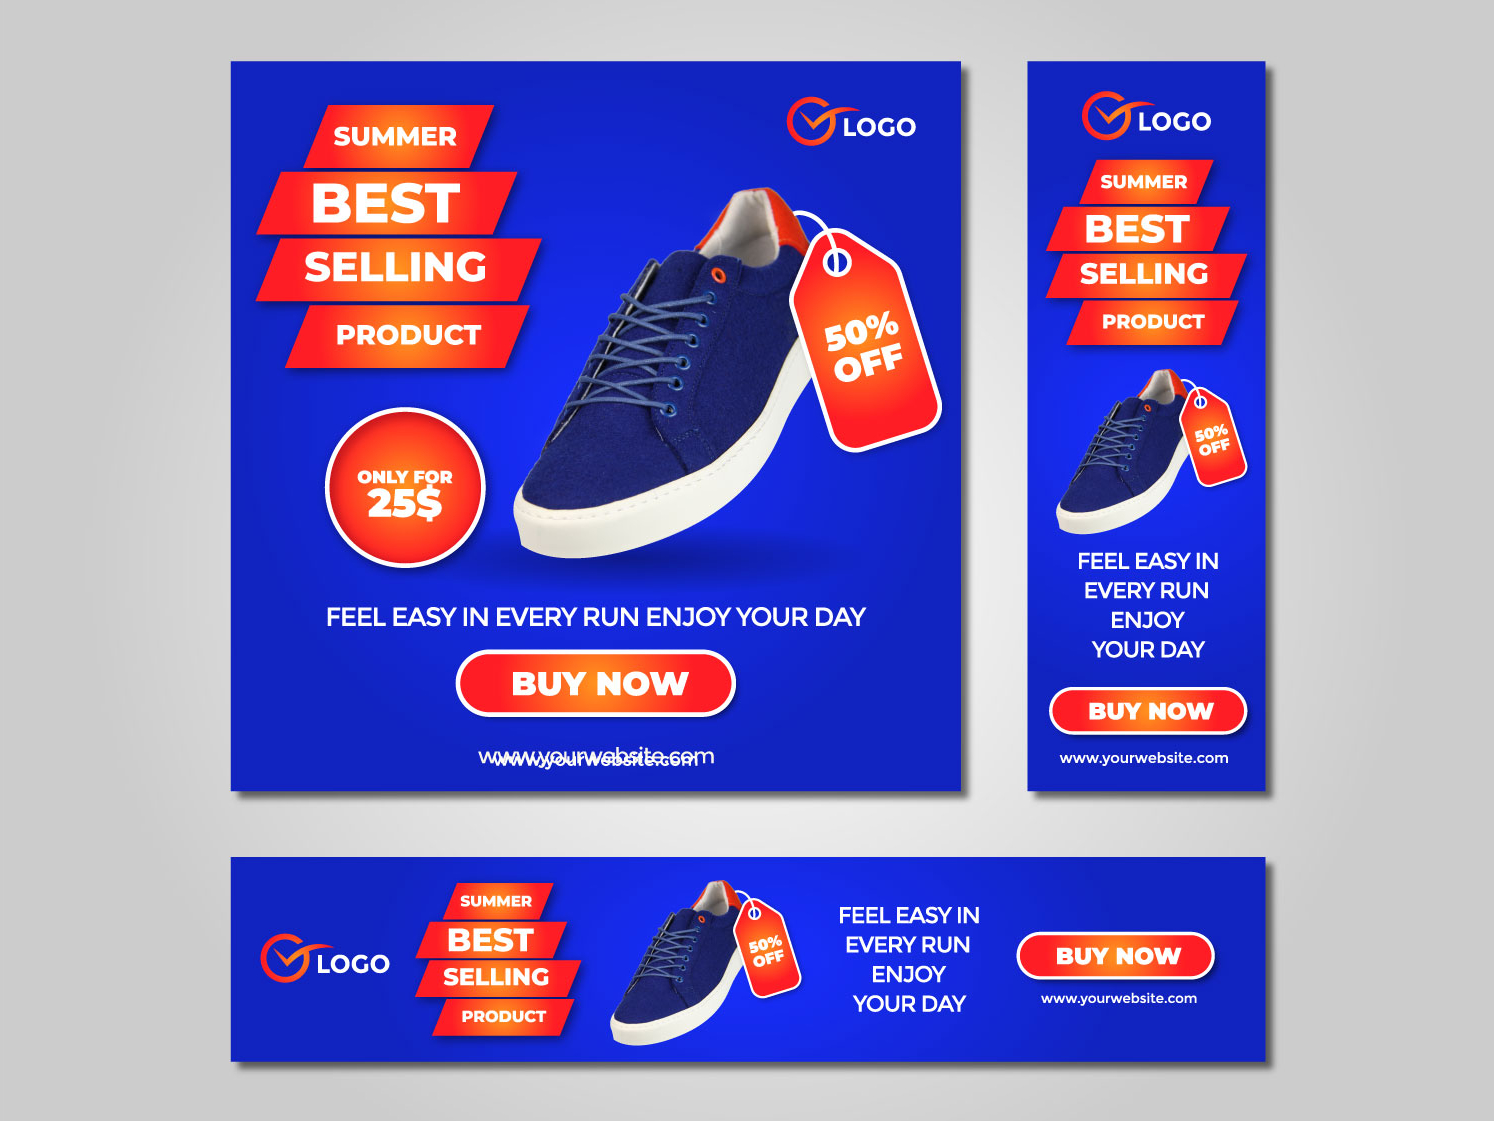 How To Create Banner Ads Design For Best Product by MD IMRAN SK on Dribbble